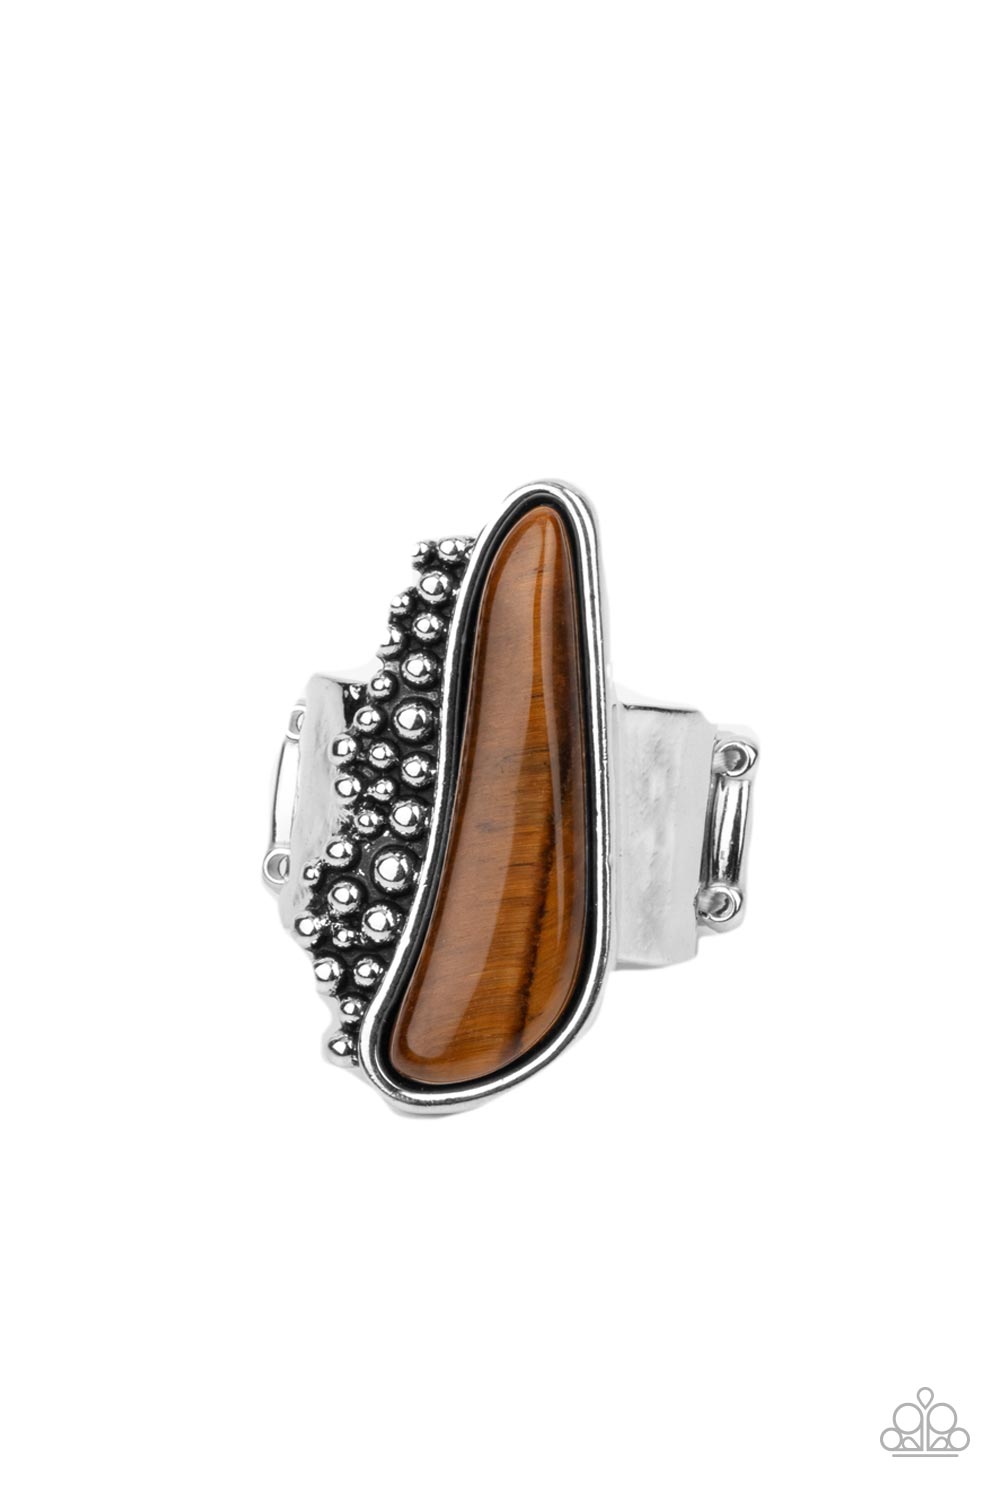 Gemstone Guide Brown Tiger's Eye Stone Ring - Paparazzi Accessories- lightbox - CarasShop.com - $5 Jewelry by Cara Jewels